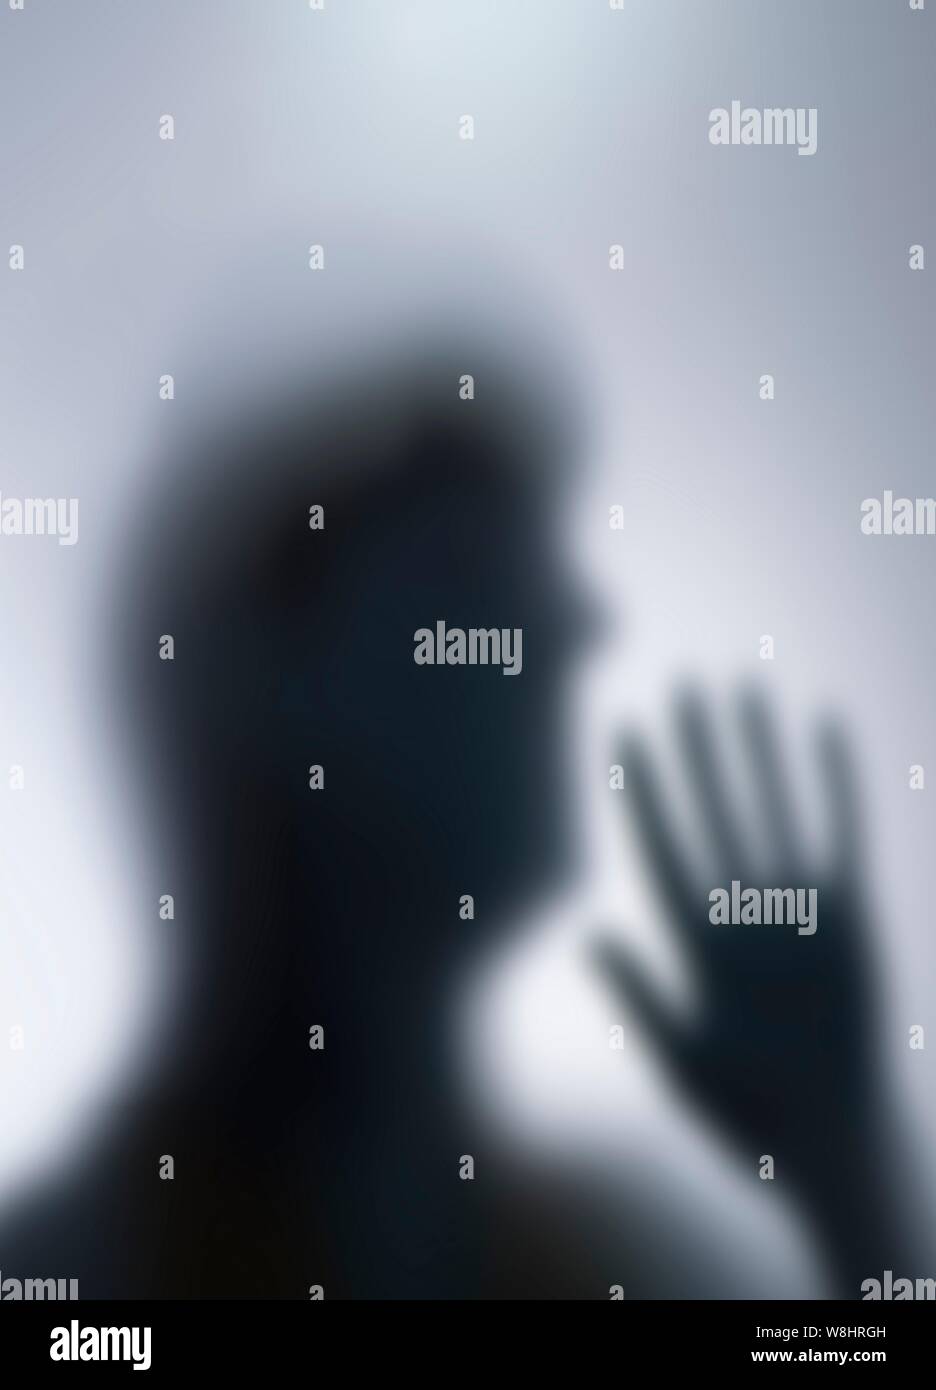 Silhouette of person's head and hand. Stock Photo